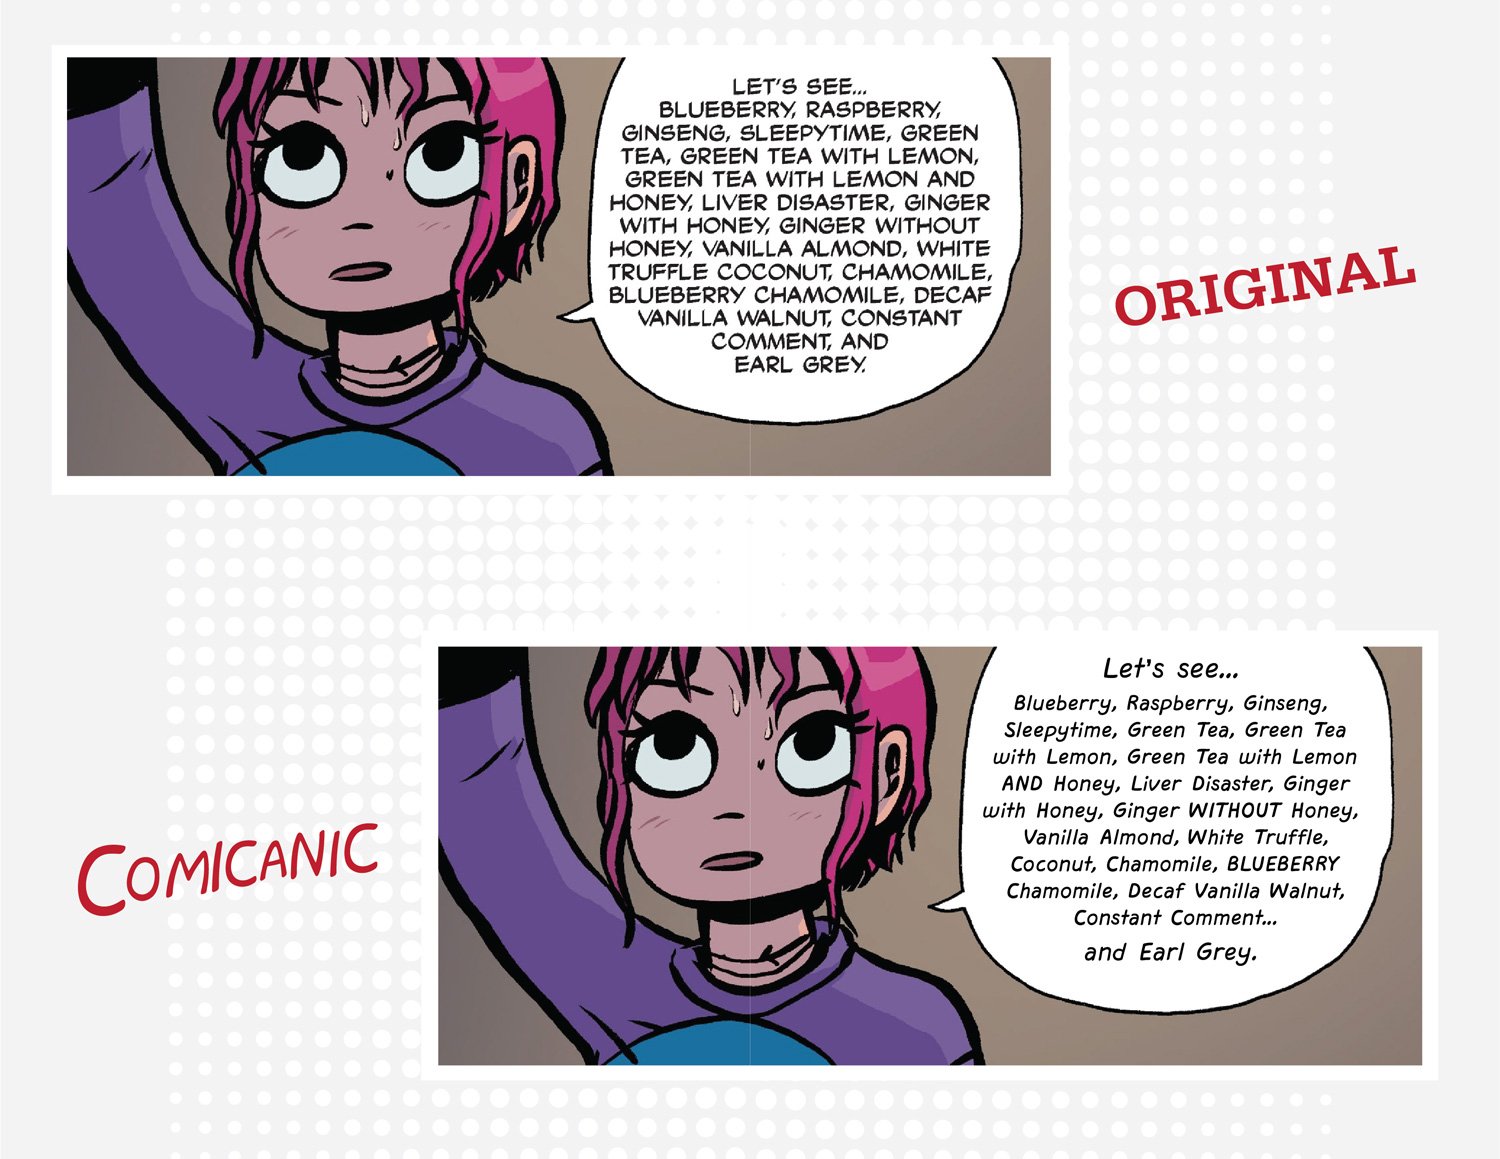 Comic demonstrating Comicanic in paragraph form